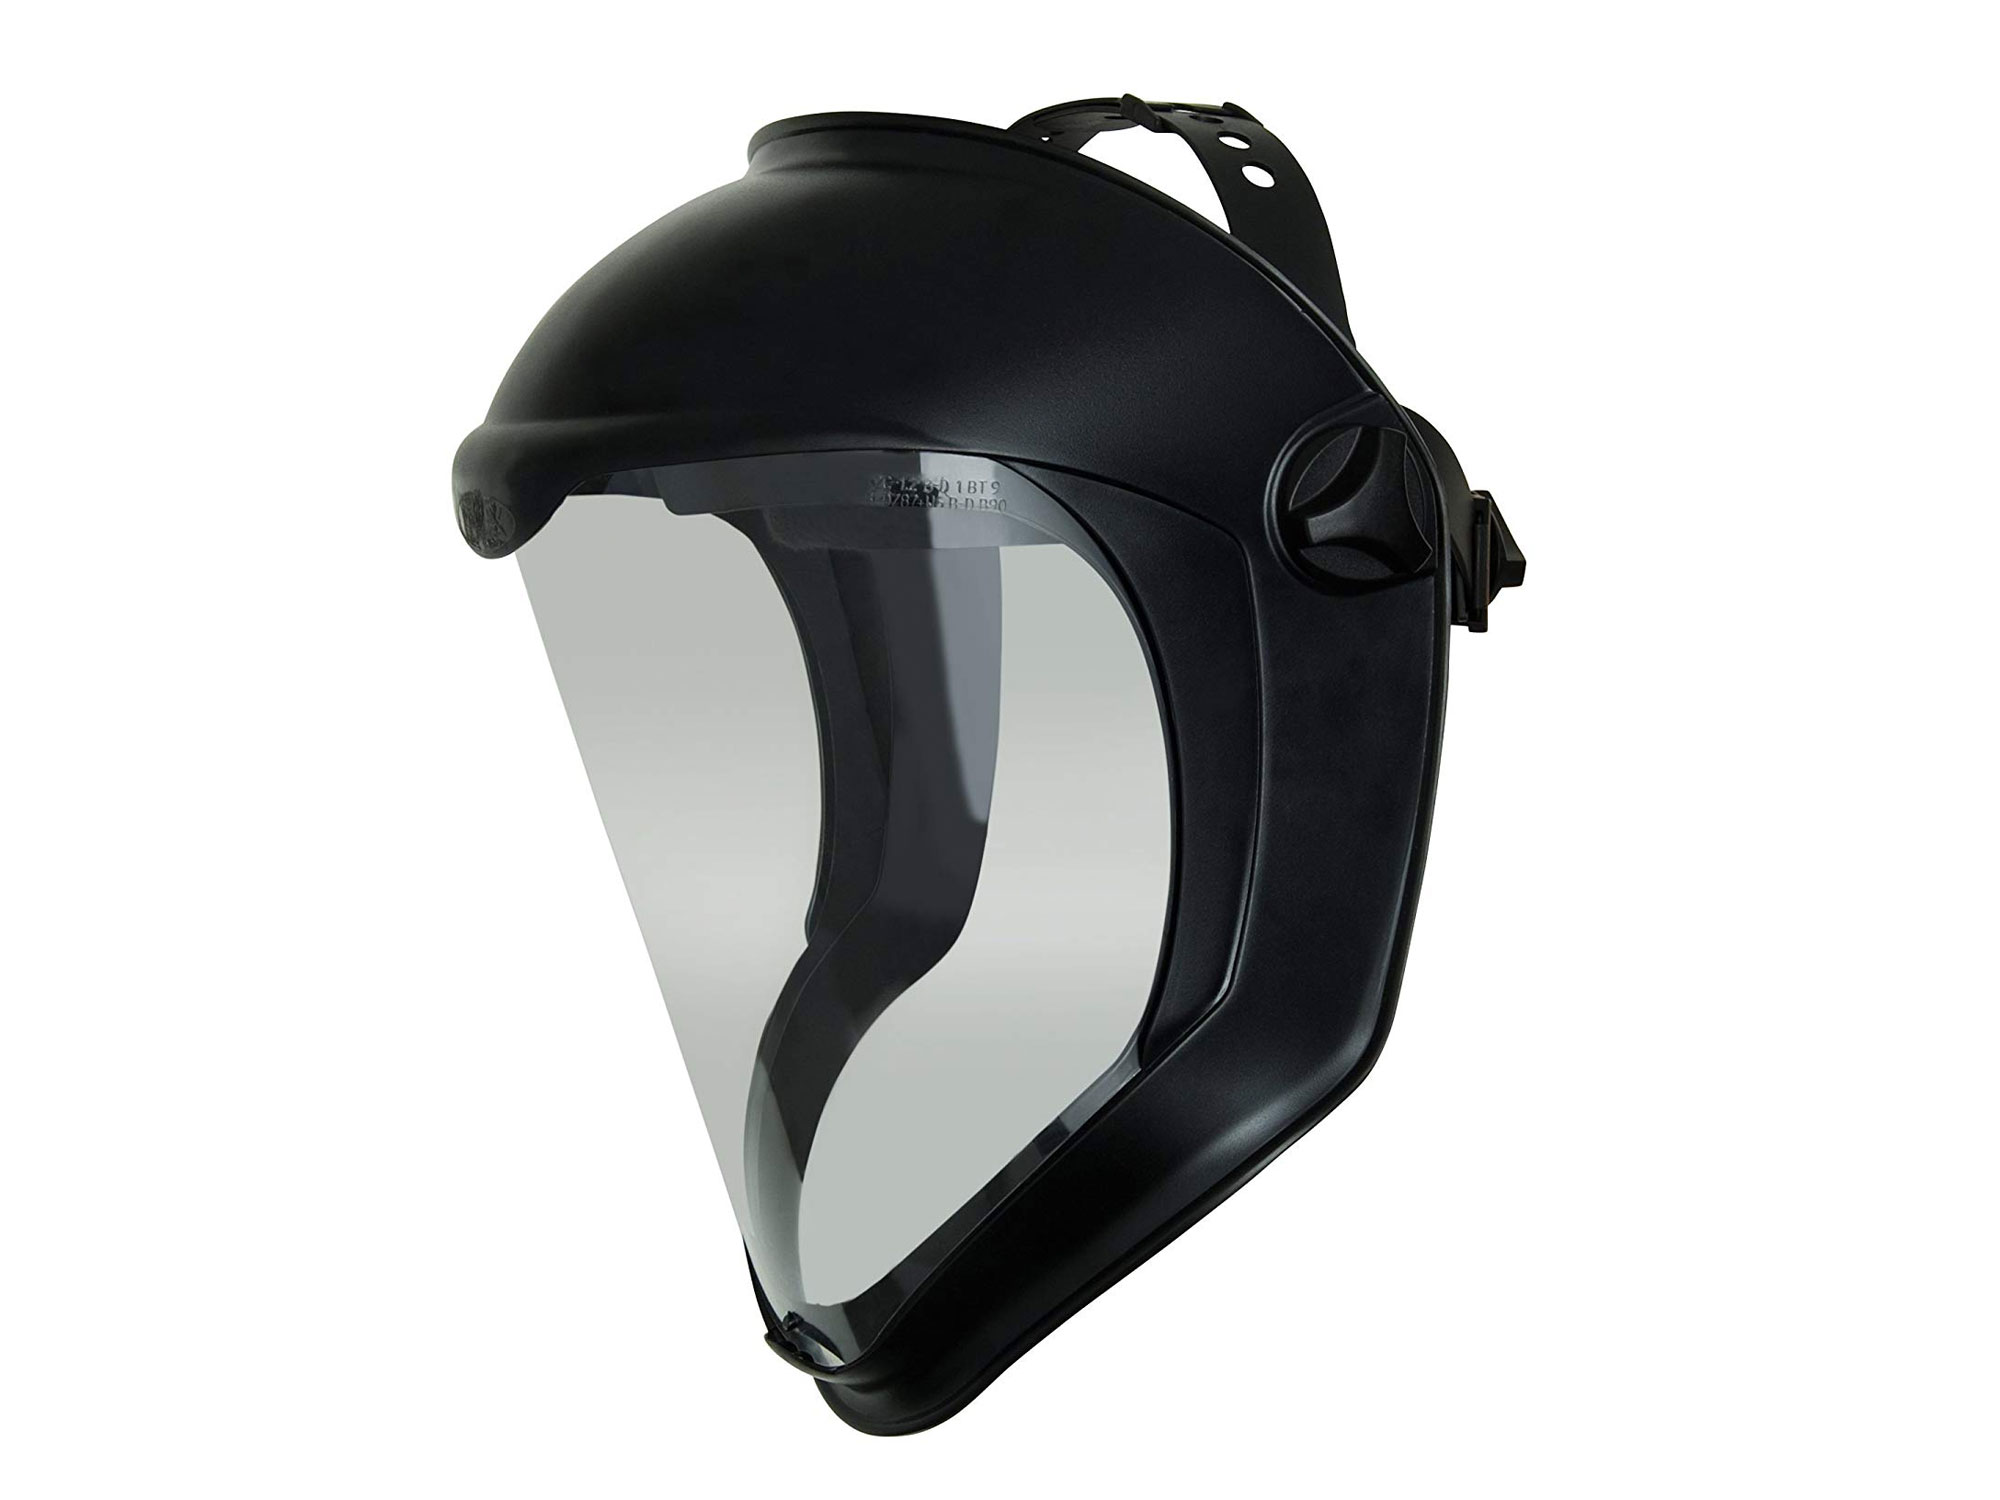 Uvex Bionic Face Shield with Clear Polycarbonate Visor and Anti-Fog/Hard Coat